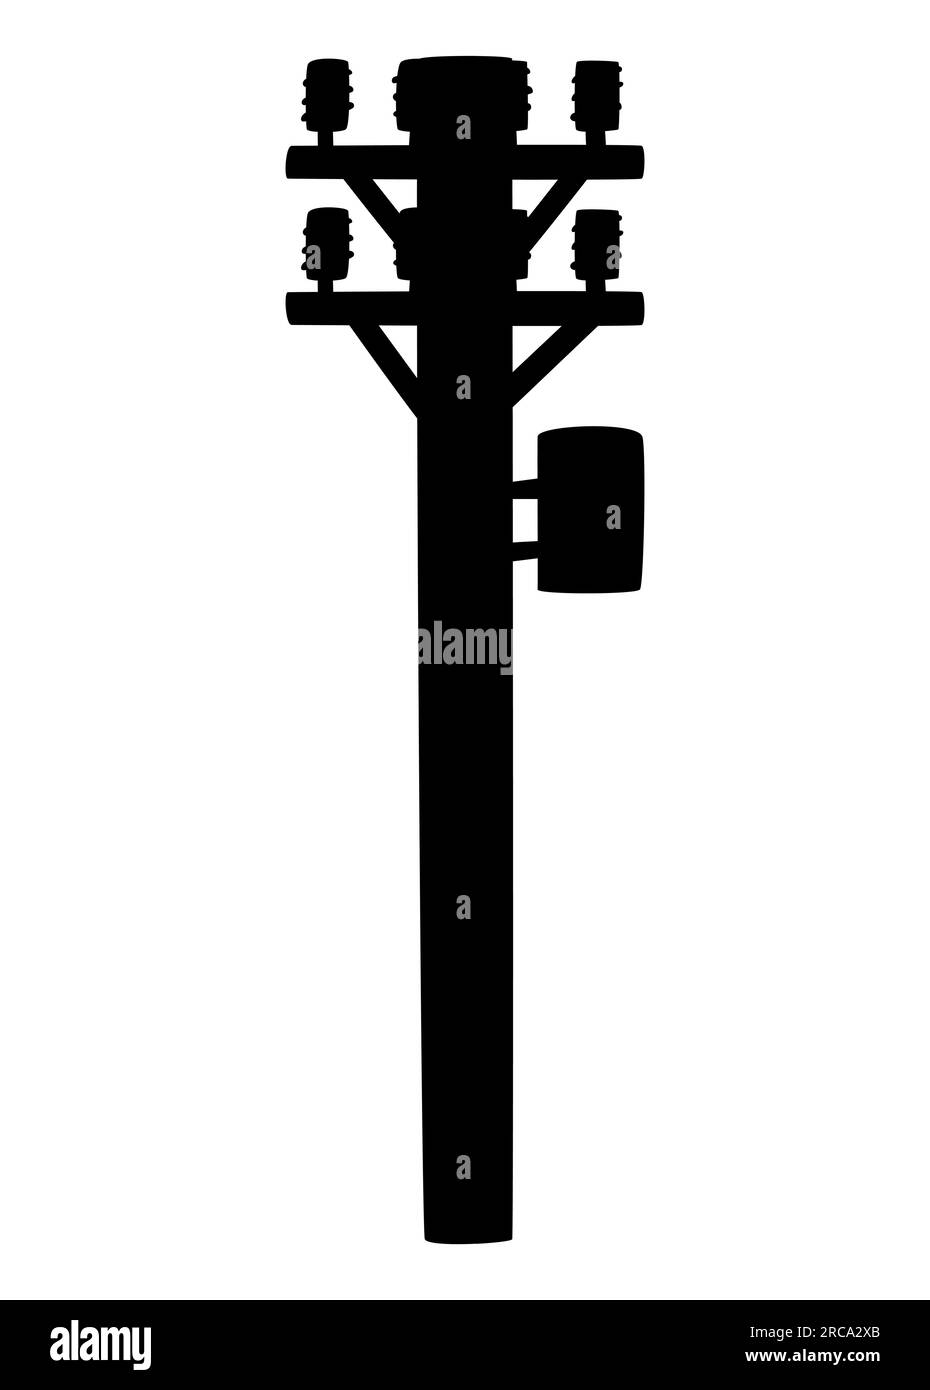 Black silhouette of an Electric Pole icon, Power and energy concept, Electricity icons, vector illustration isolated on white background Stock Vector